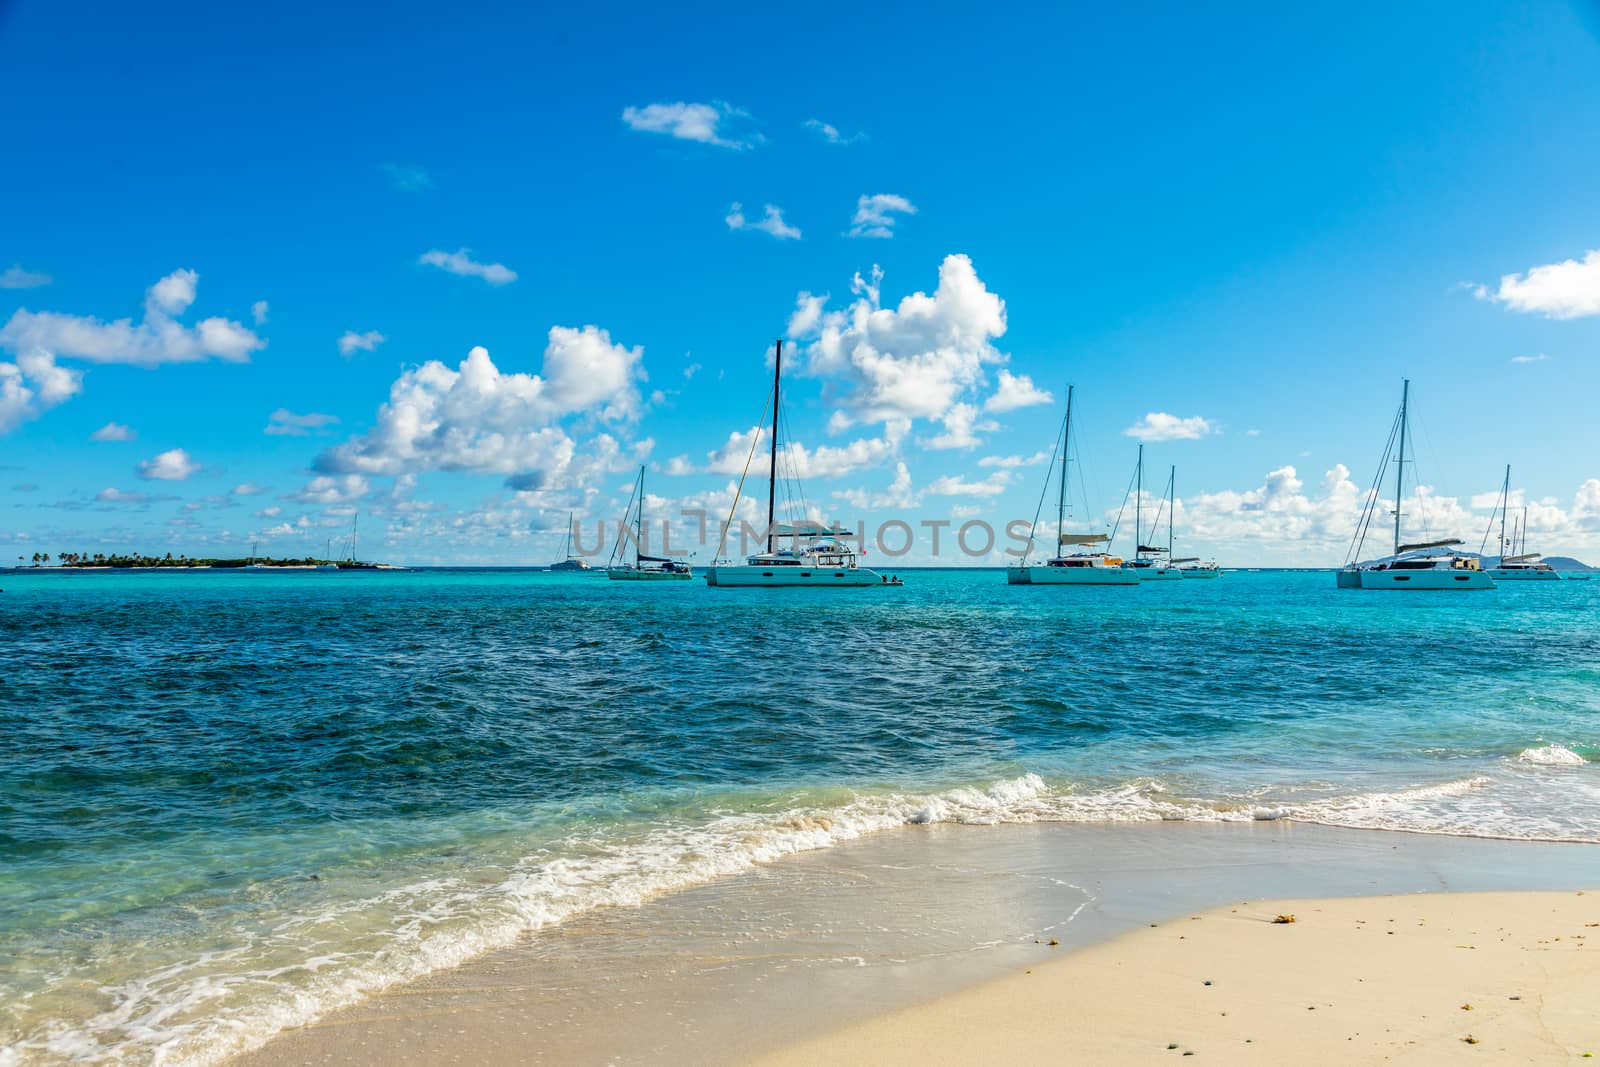 Turquoise colored sea with ancored yachts and catamarans, Tobago by ambeon